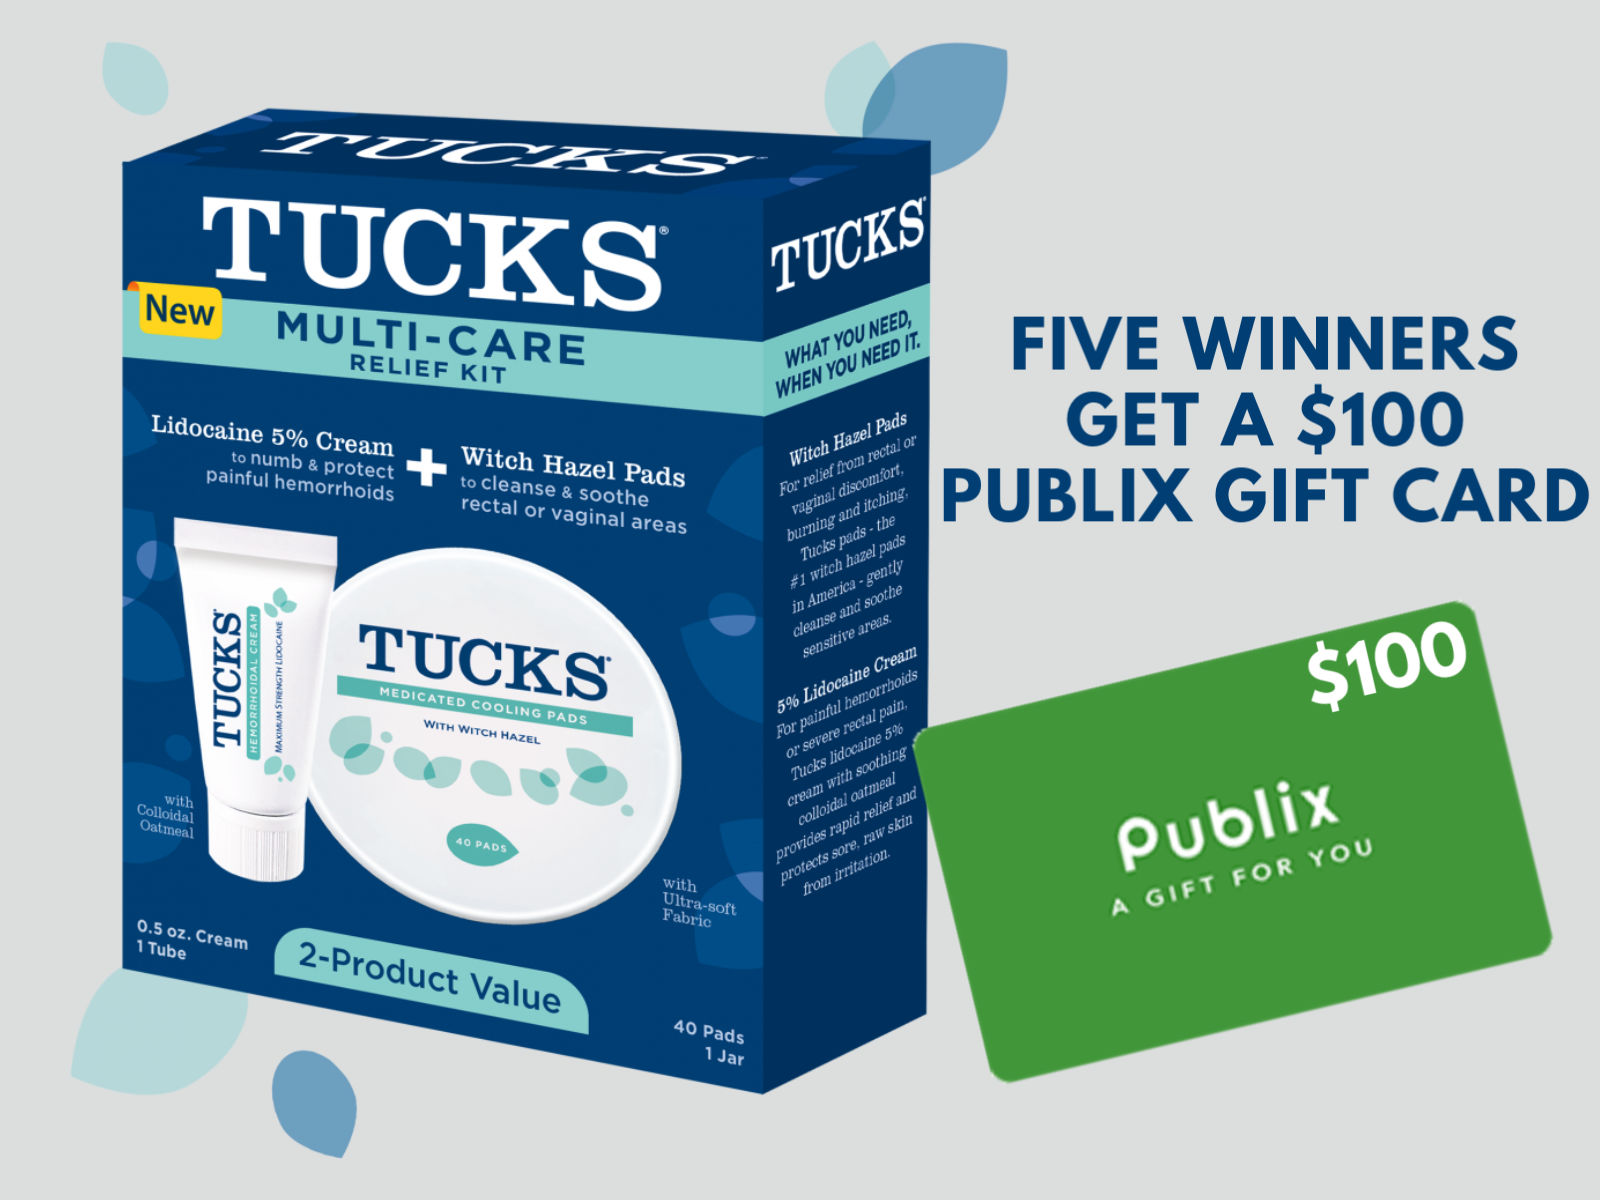 Look For Tucks Multi-Care Relief Kit At Publix + Enter To Win One Of Five  $100 Publix Gift Cards! - iHeartPublix